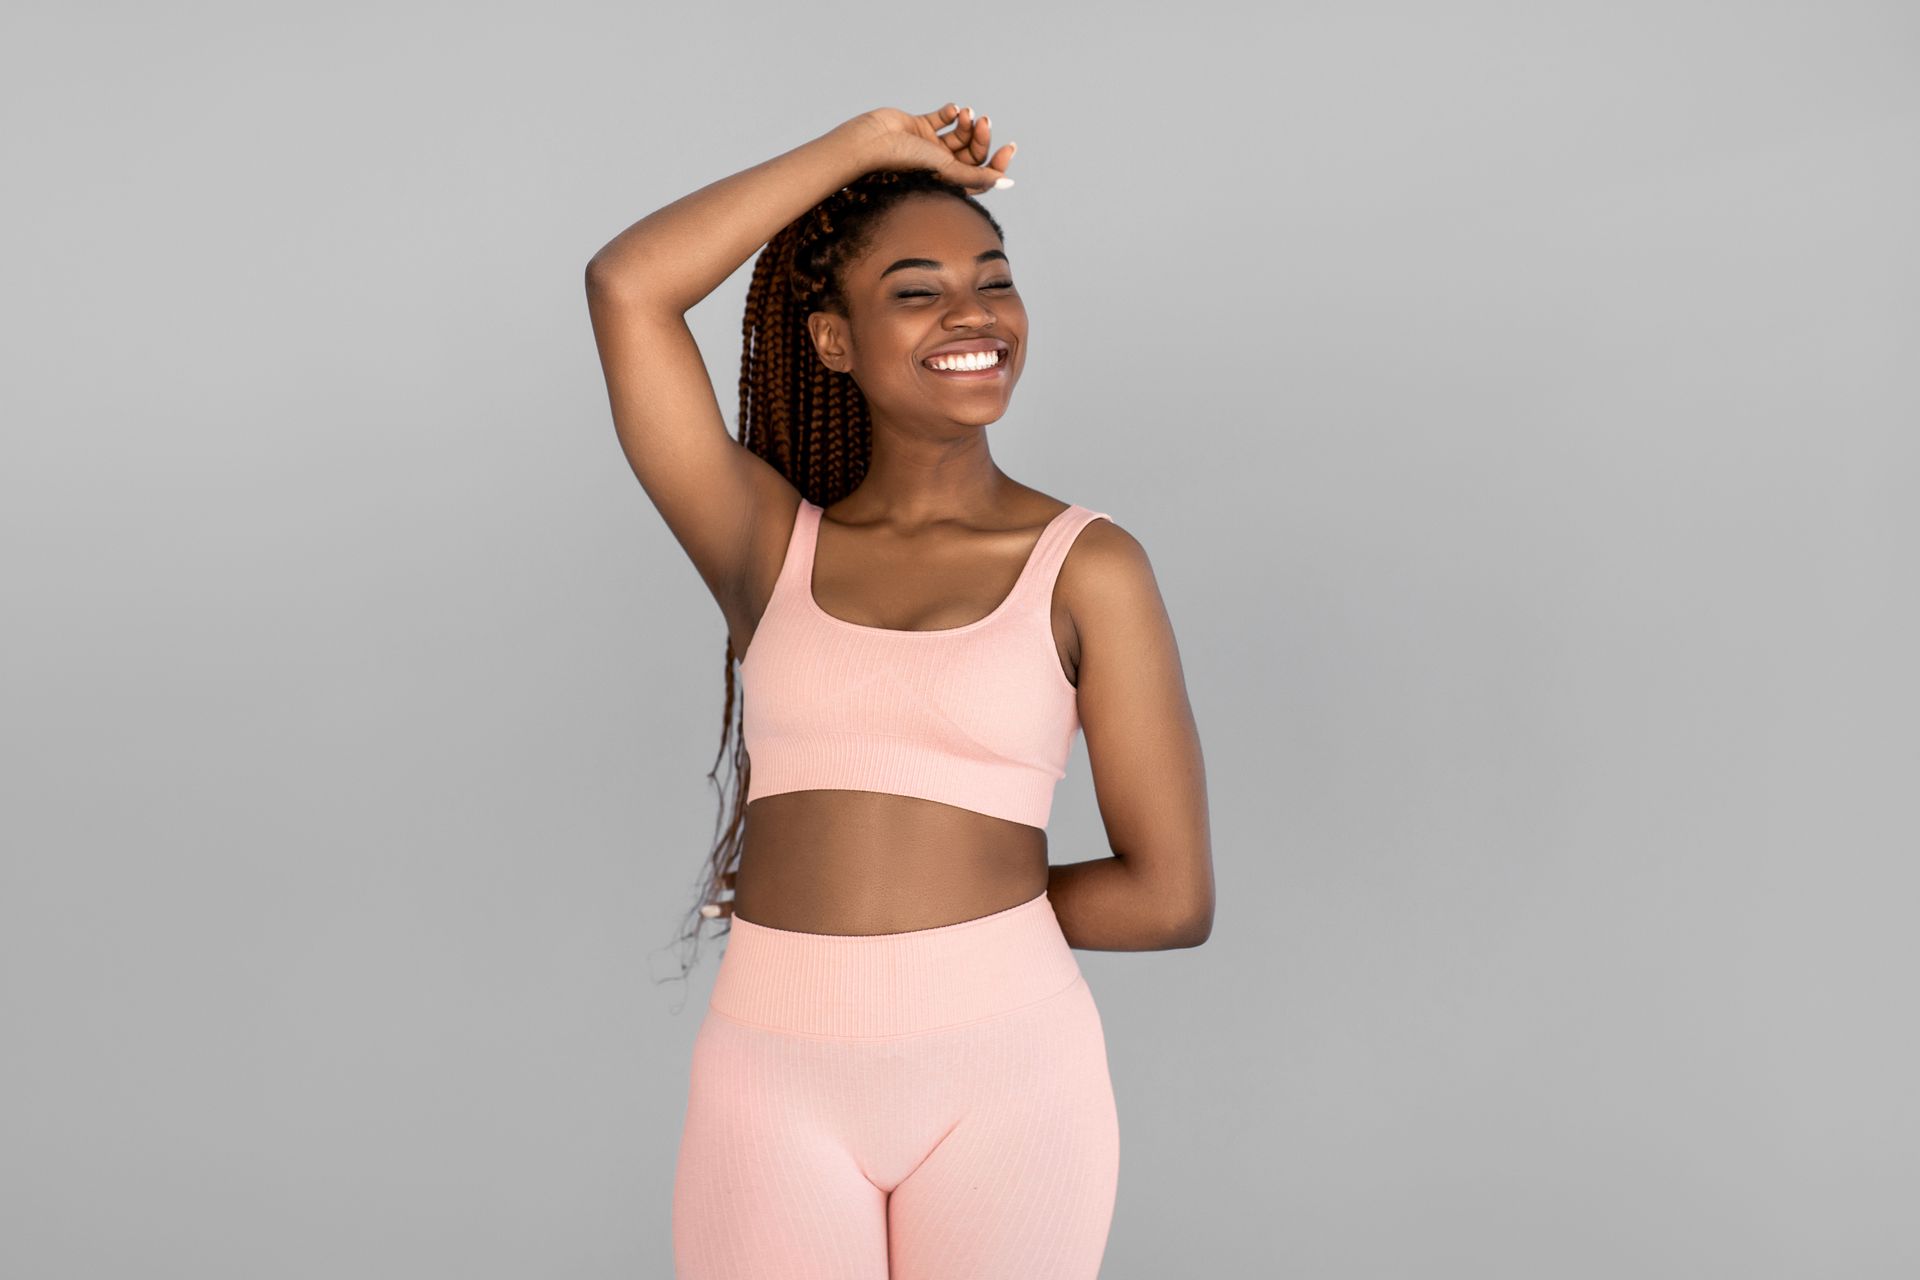 a woman in a pink sports bra and shorts is smiling .